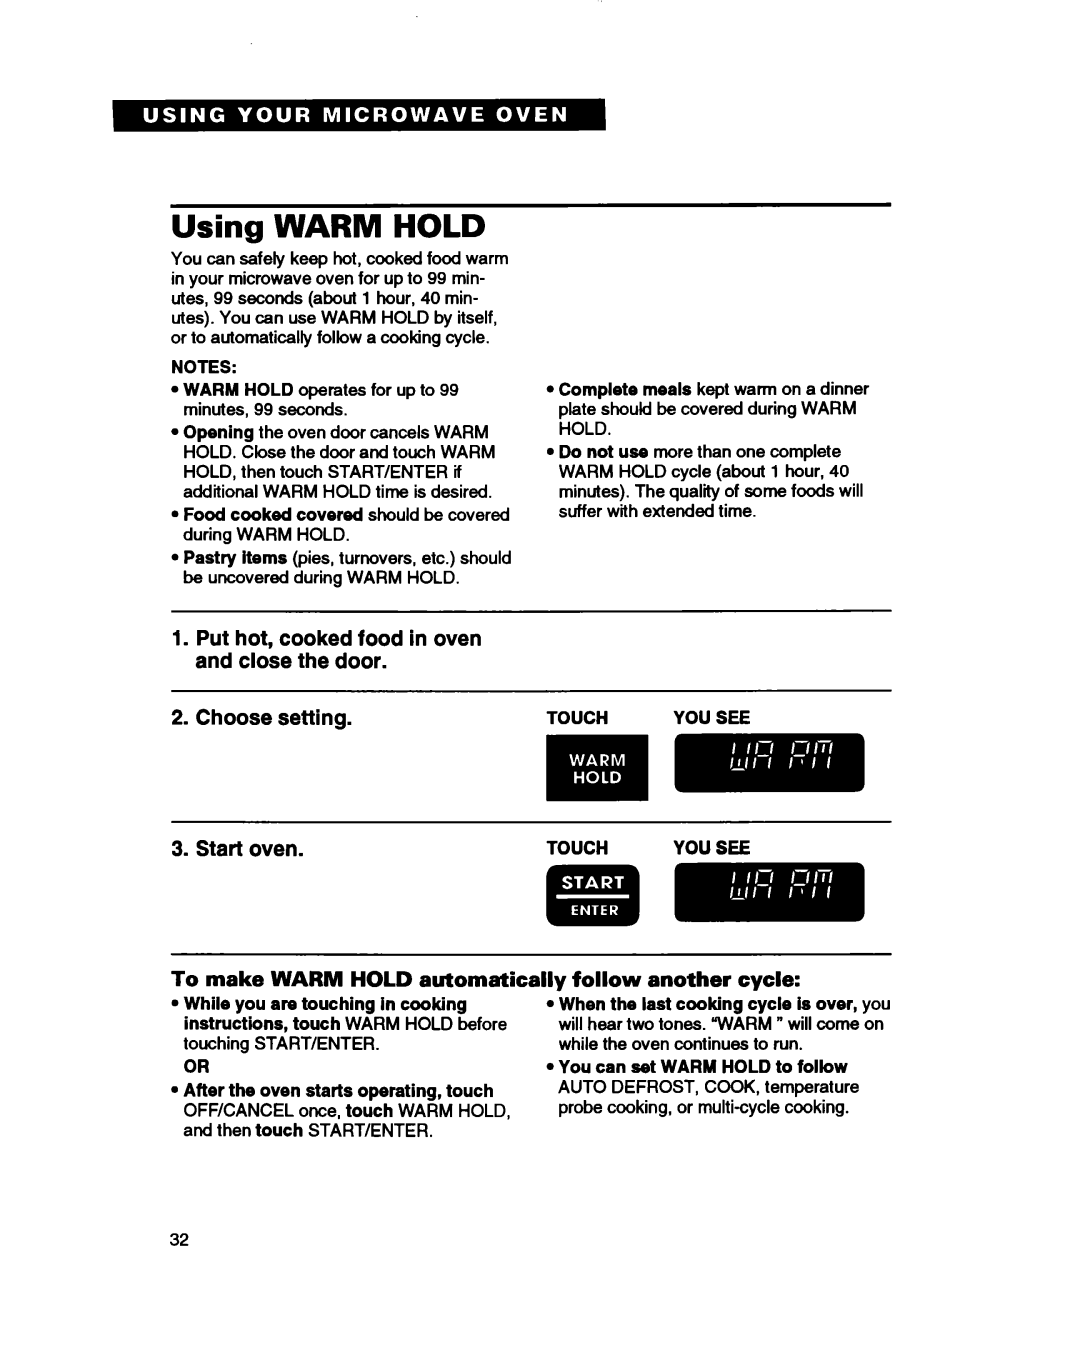 Whirlpool MH7110XB Using WARM HOLD, Put hot, cooked food in oven and close the door, Choose setting, follow another cycle 